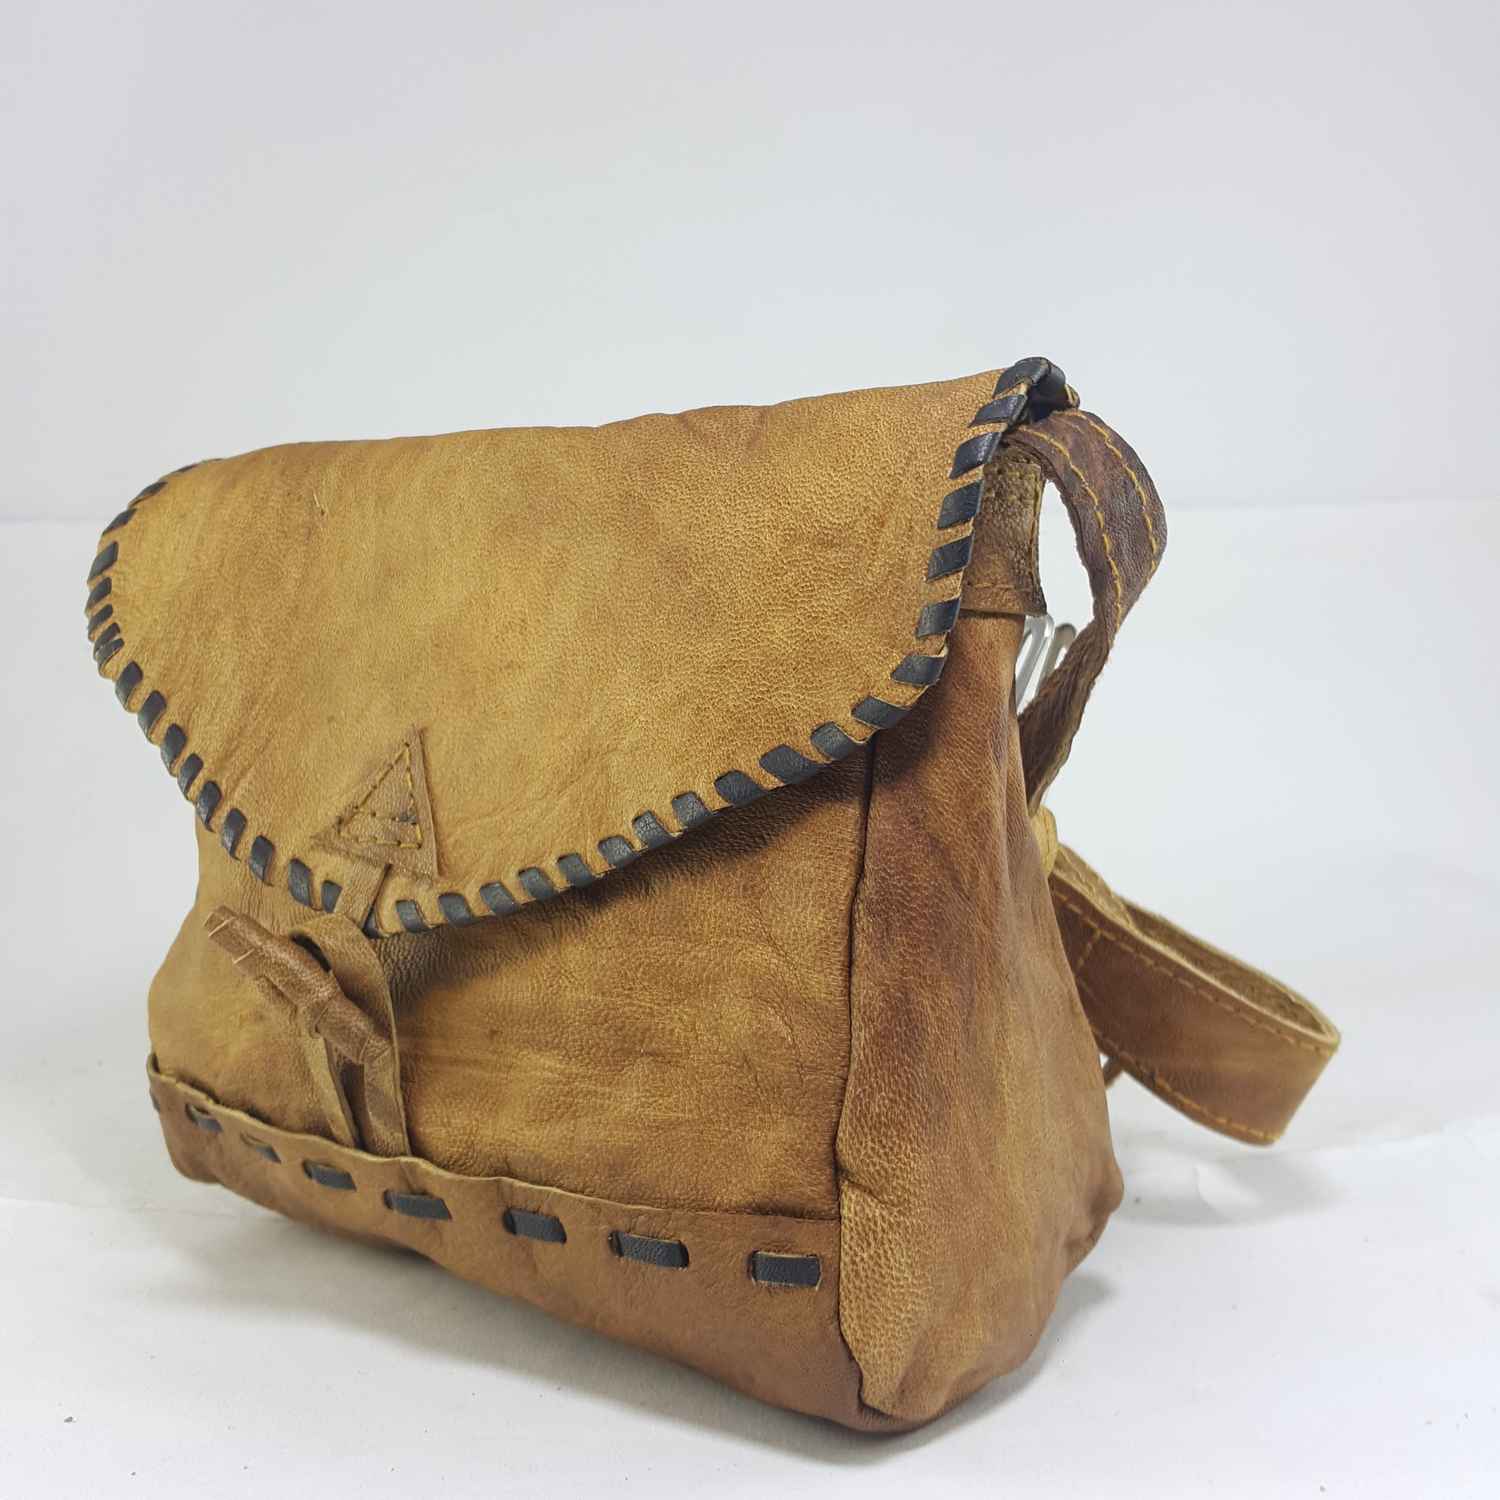 Himalayan Yak Leather Shoulder Bag leather Button Lock